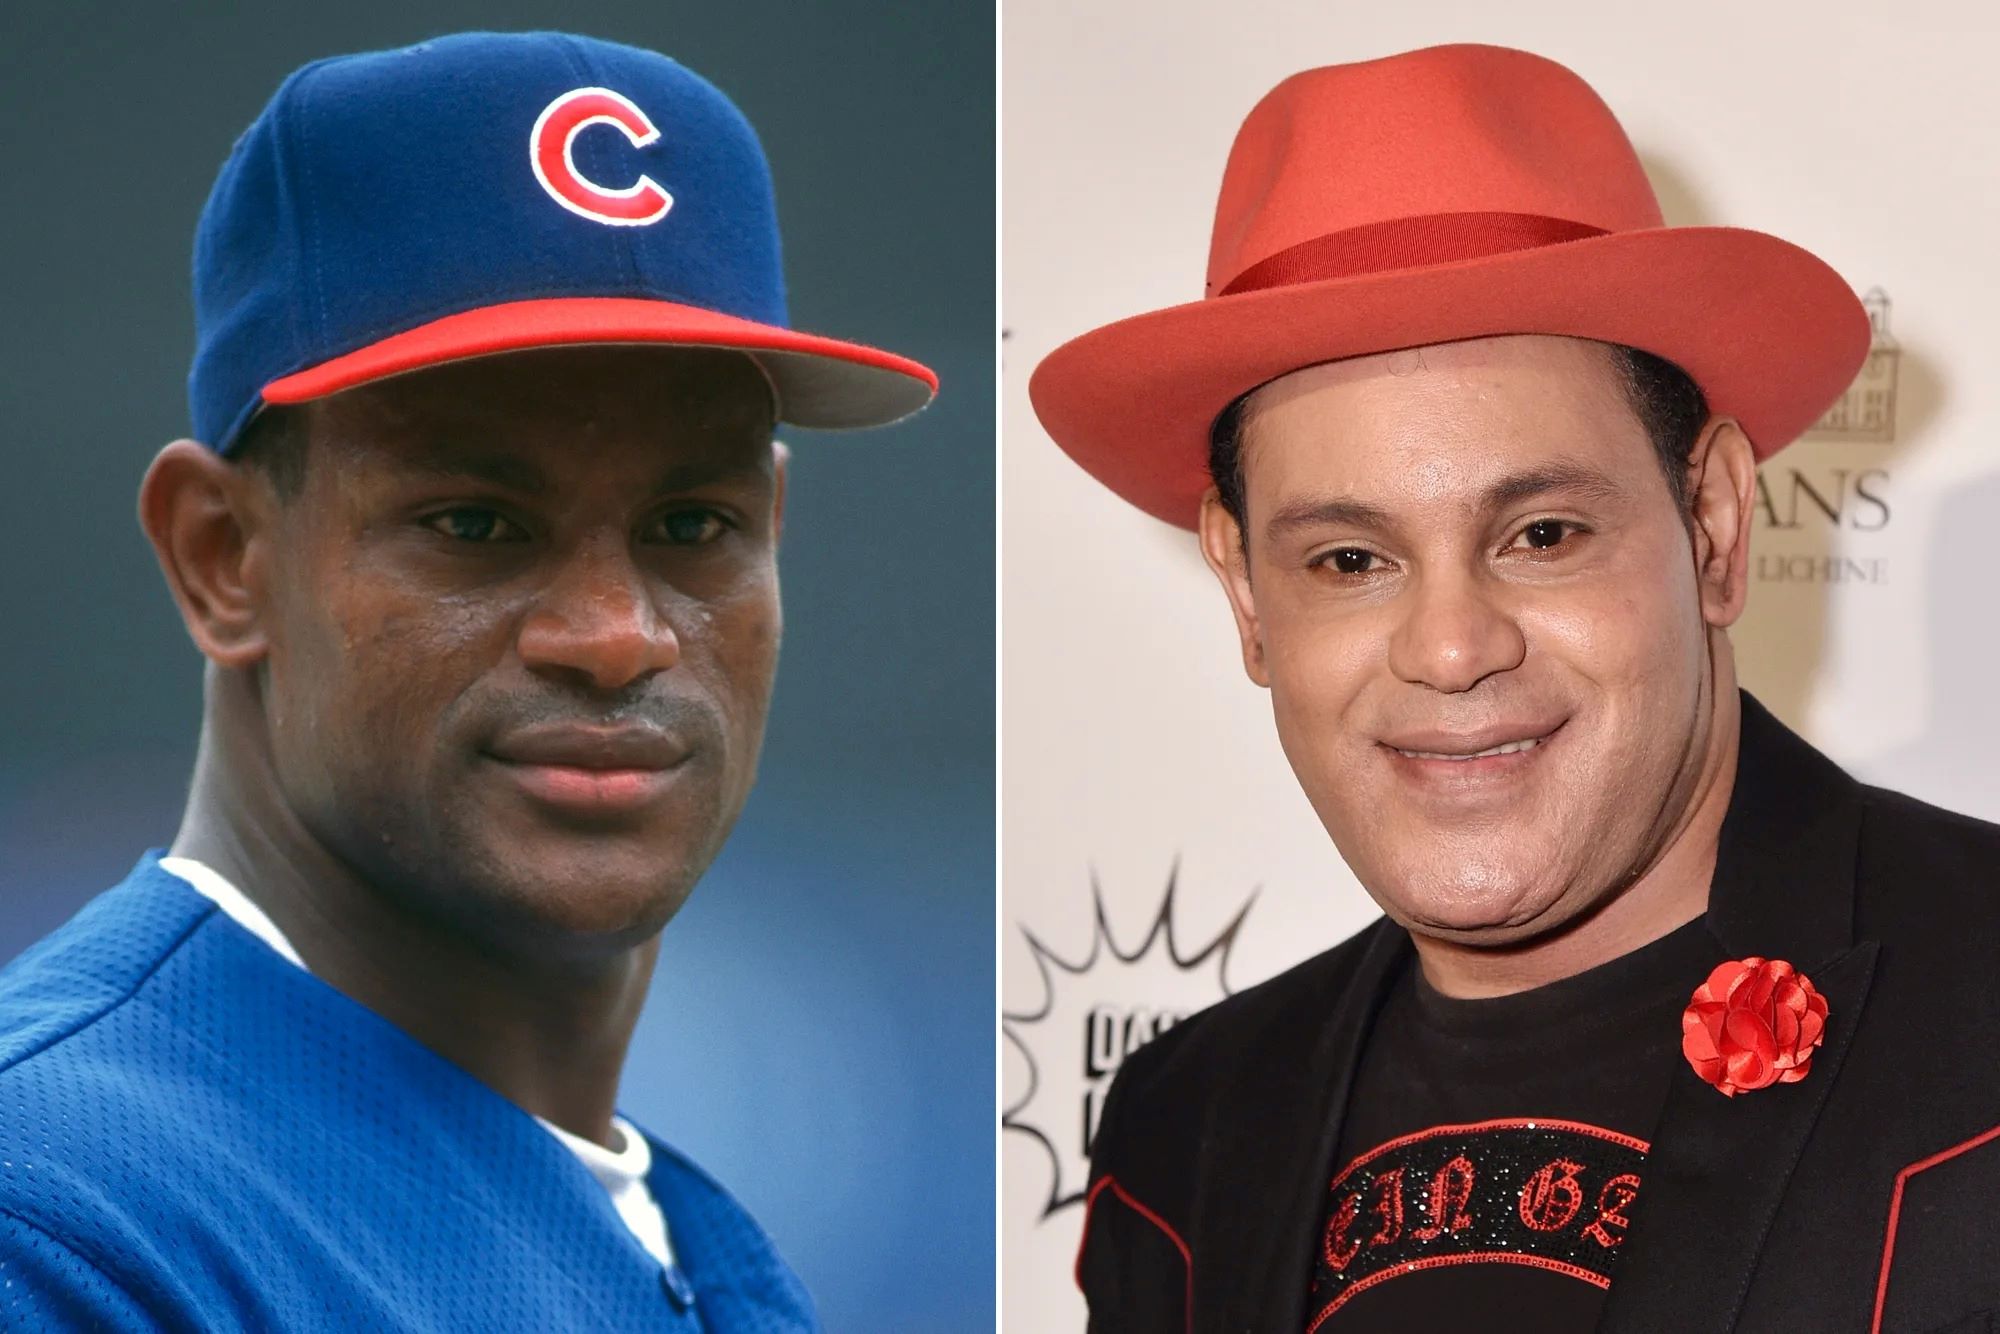 The Shocking Transformation Of Sammy Sosa: How He Completely Changed His Skin Color